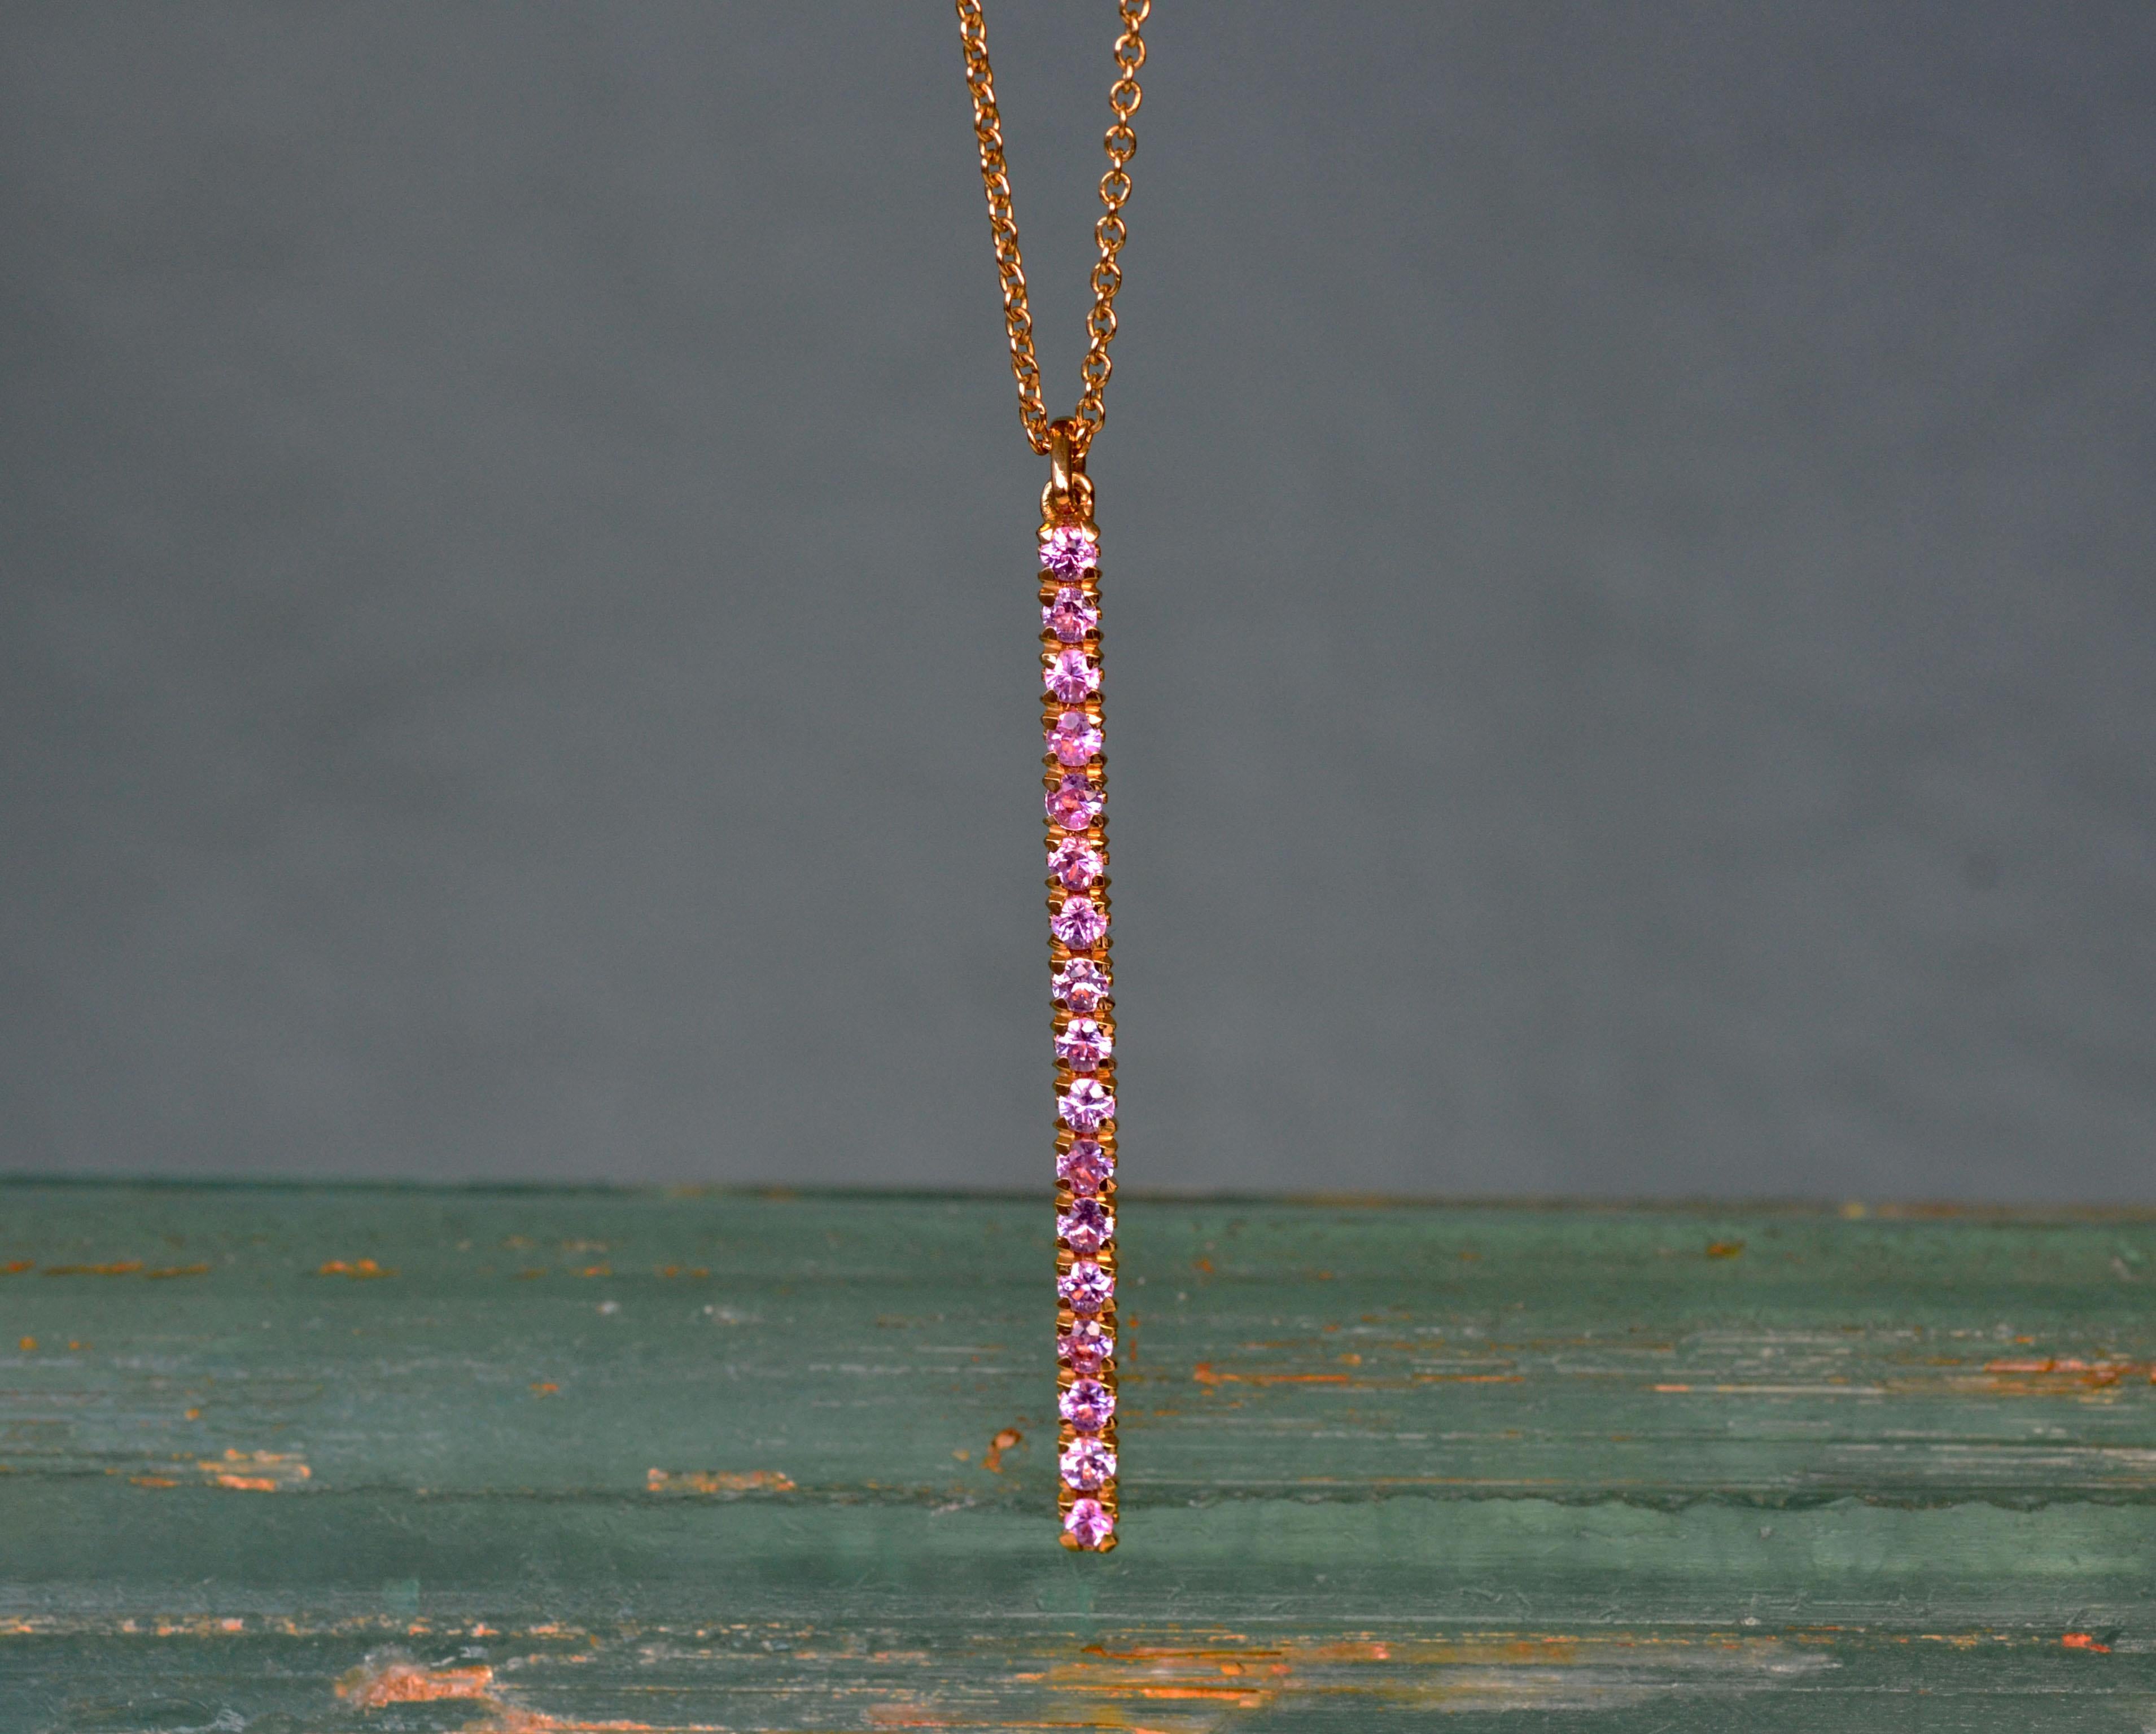 Dazzling 18k yellow gold long light pink sapphire pendant from our Blossom collection. Perfect to add a splash of colour to your day and outfit. For a minimal look, you can wear it solo or together with our Blossom earring studs and eternity band.